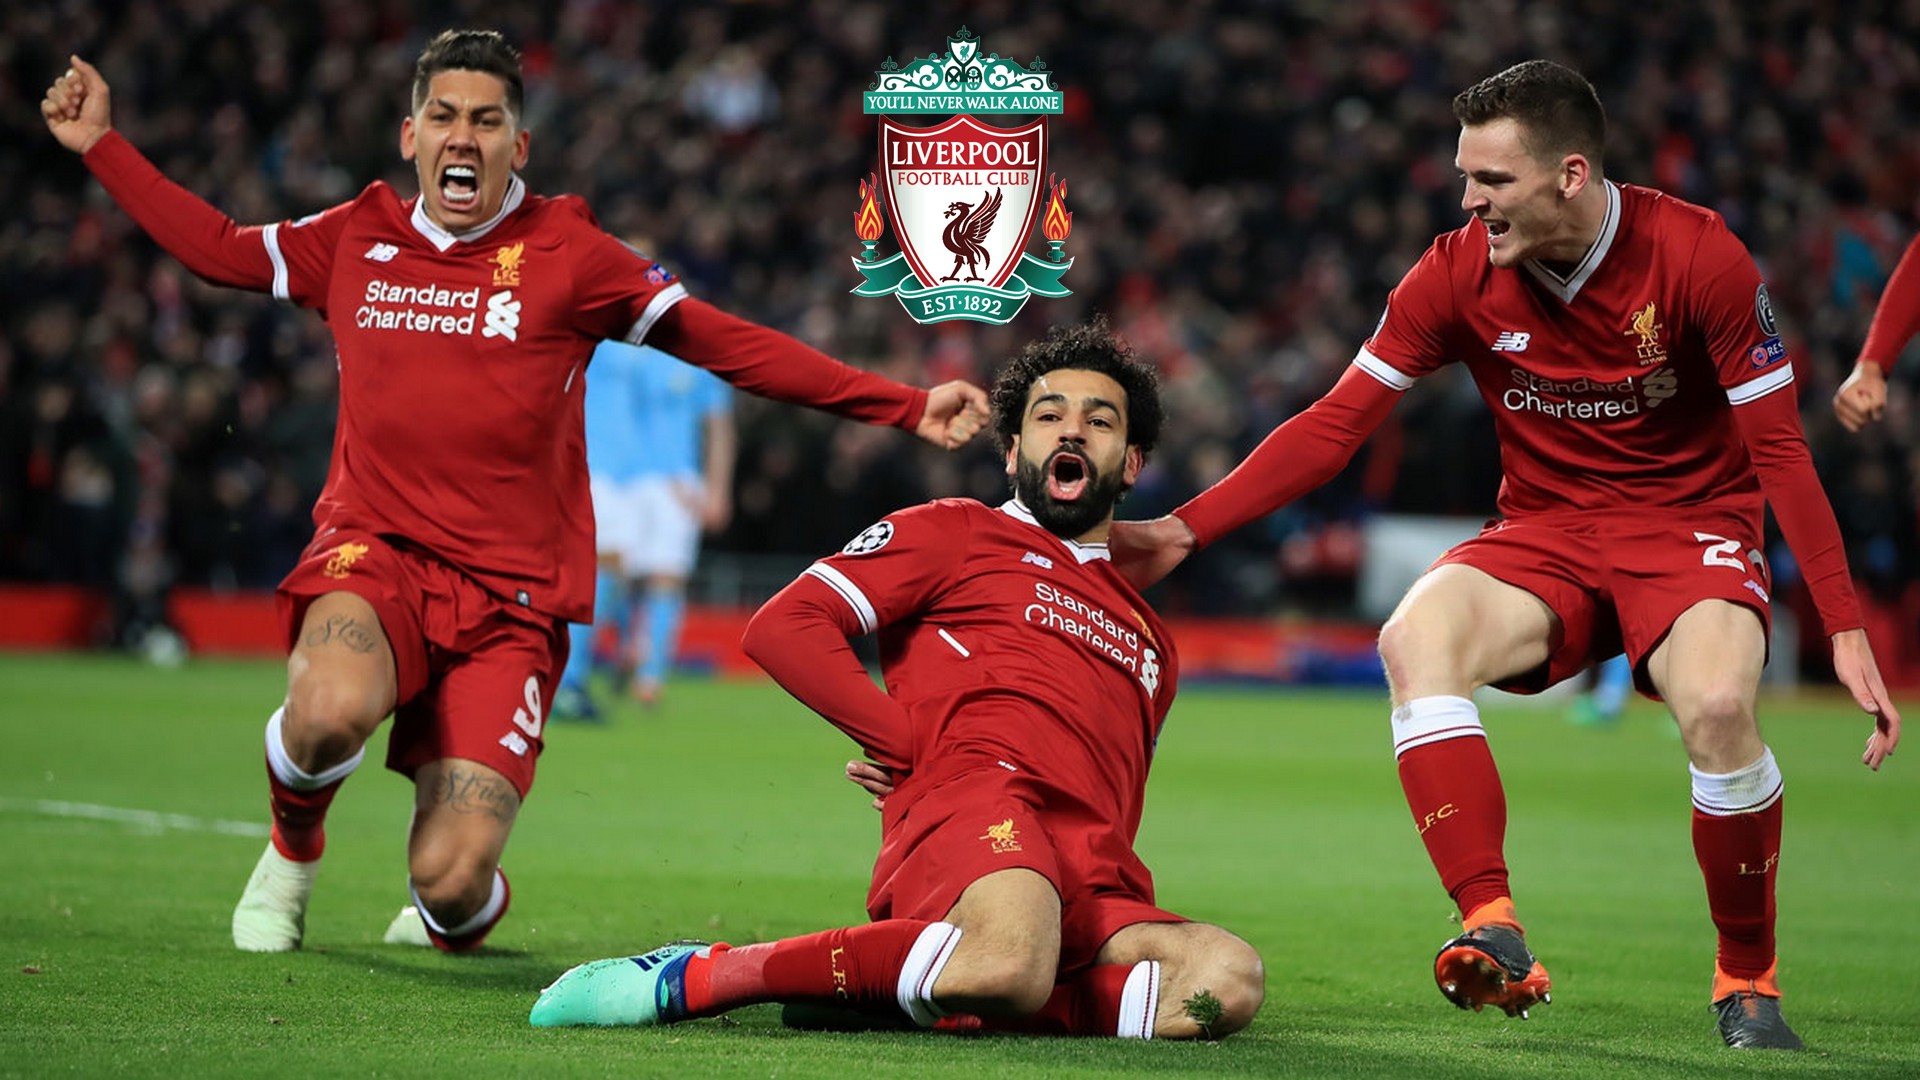 Mohamed Salah Desktop Backgrounds with image resolution 1920x1080 pixel. You can make this wallpaper for your Desktop Computer Backgrounds, Mac Wallpapers, Android Lock screen or iPhone Screensavers